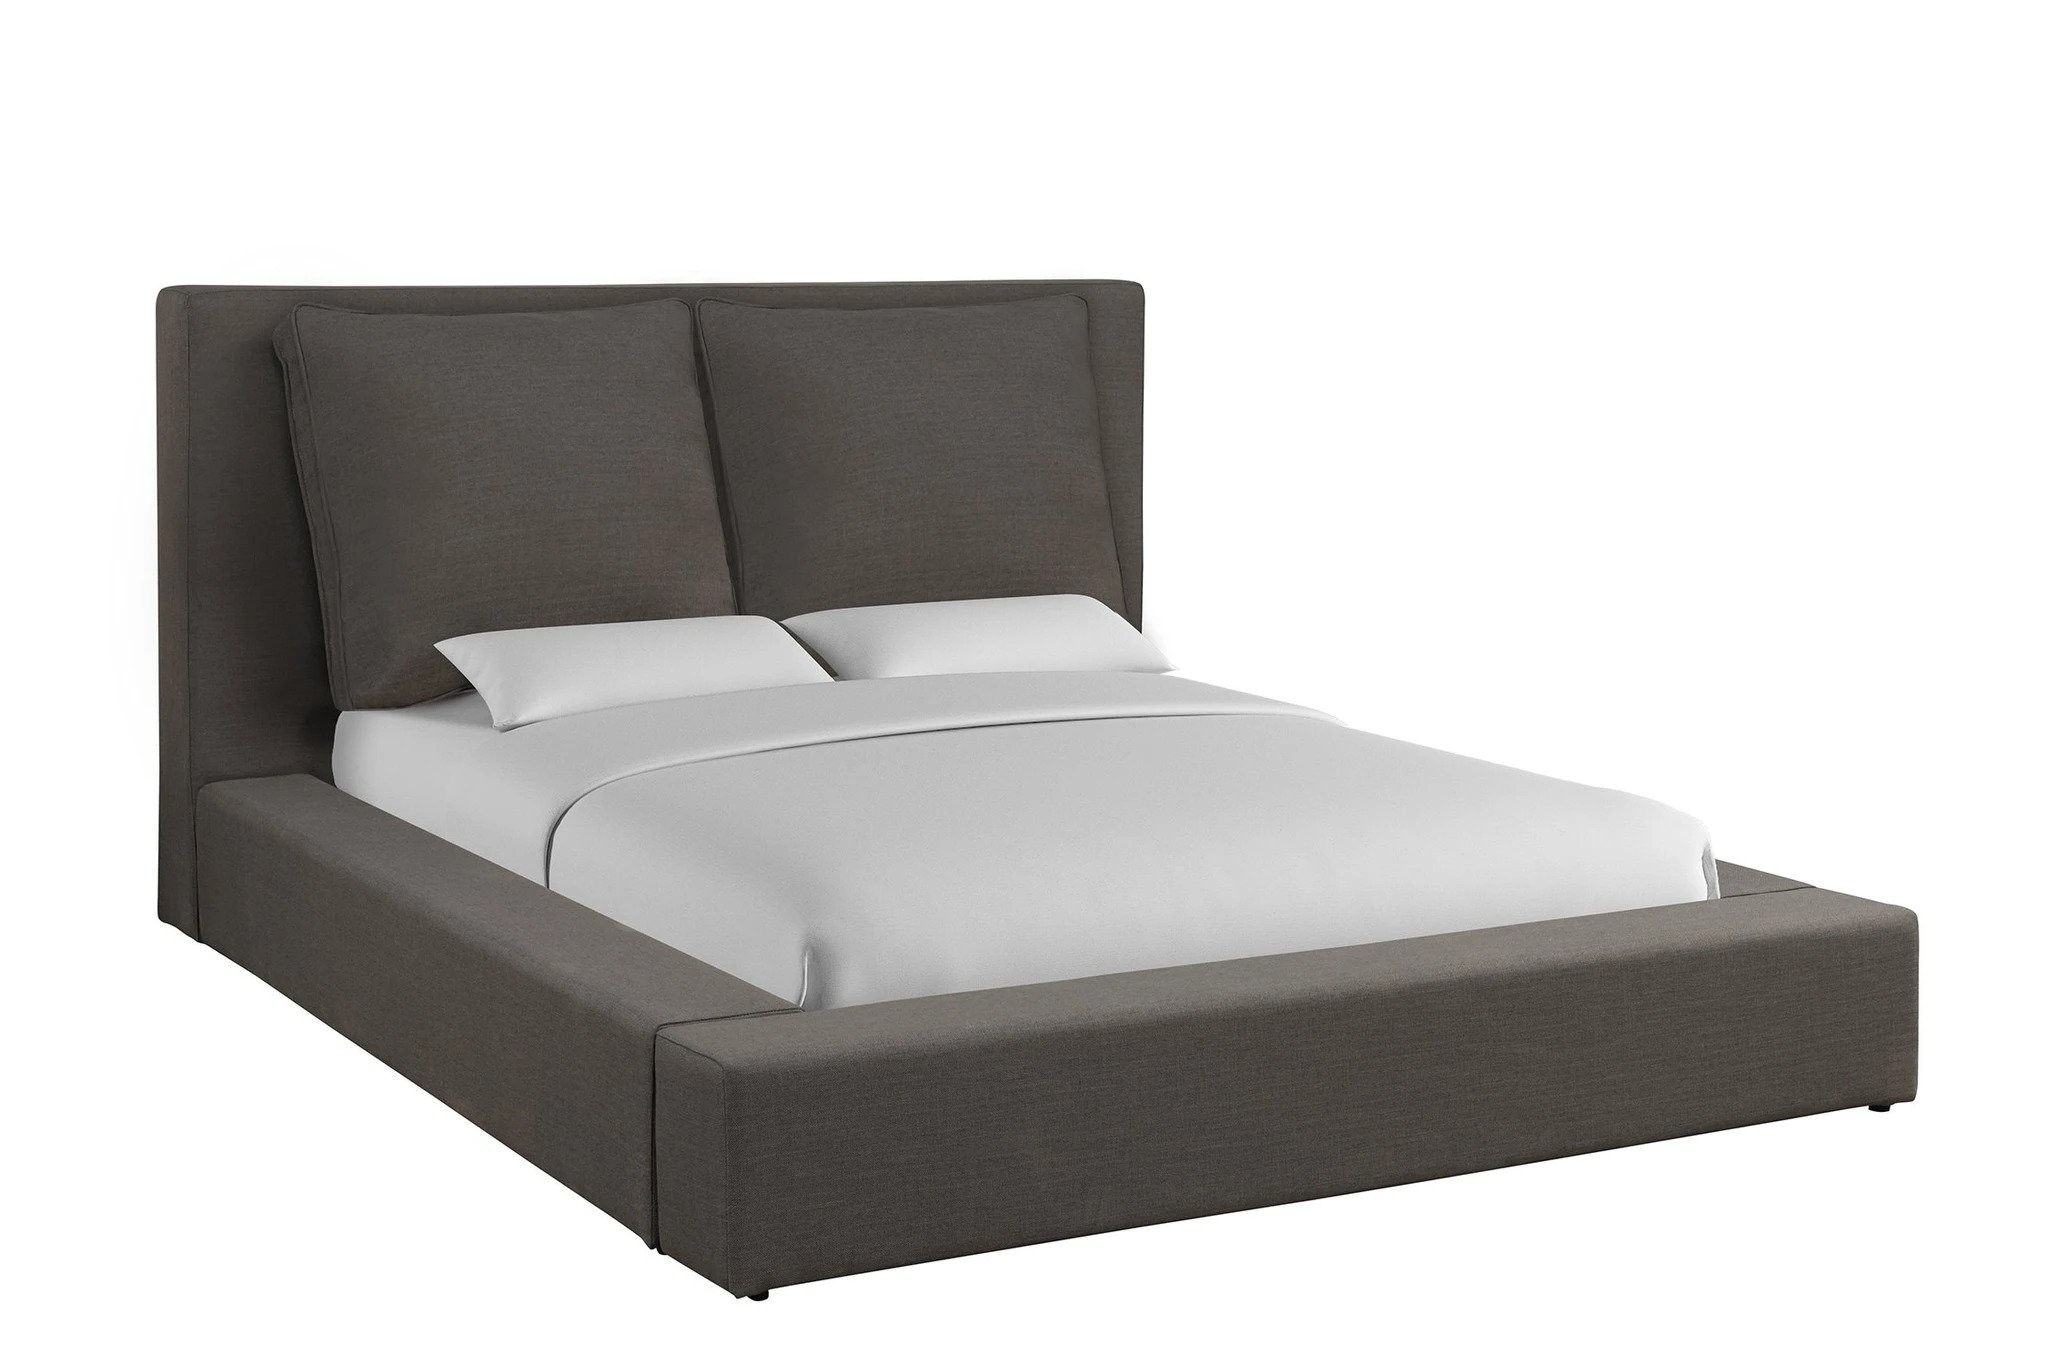 Parker Living Bedroom Heavenly - Flax Charcoal Queen Bed With